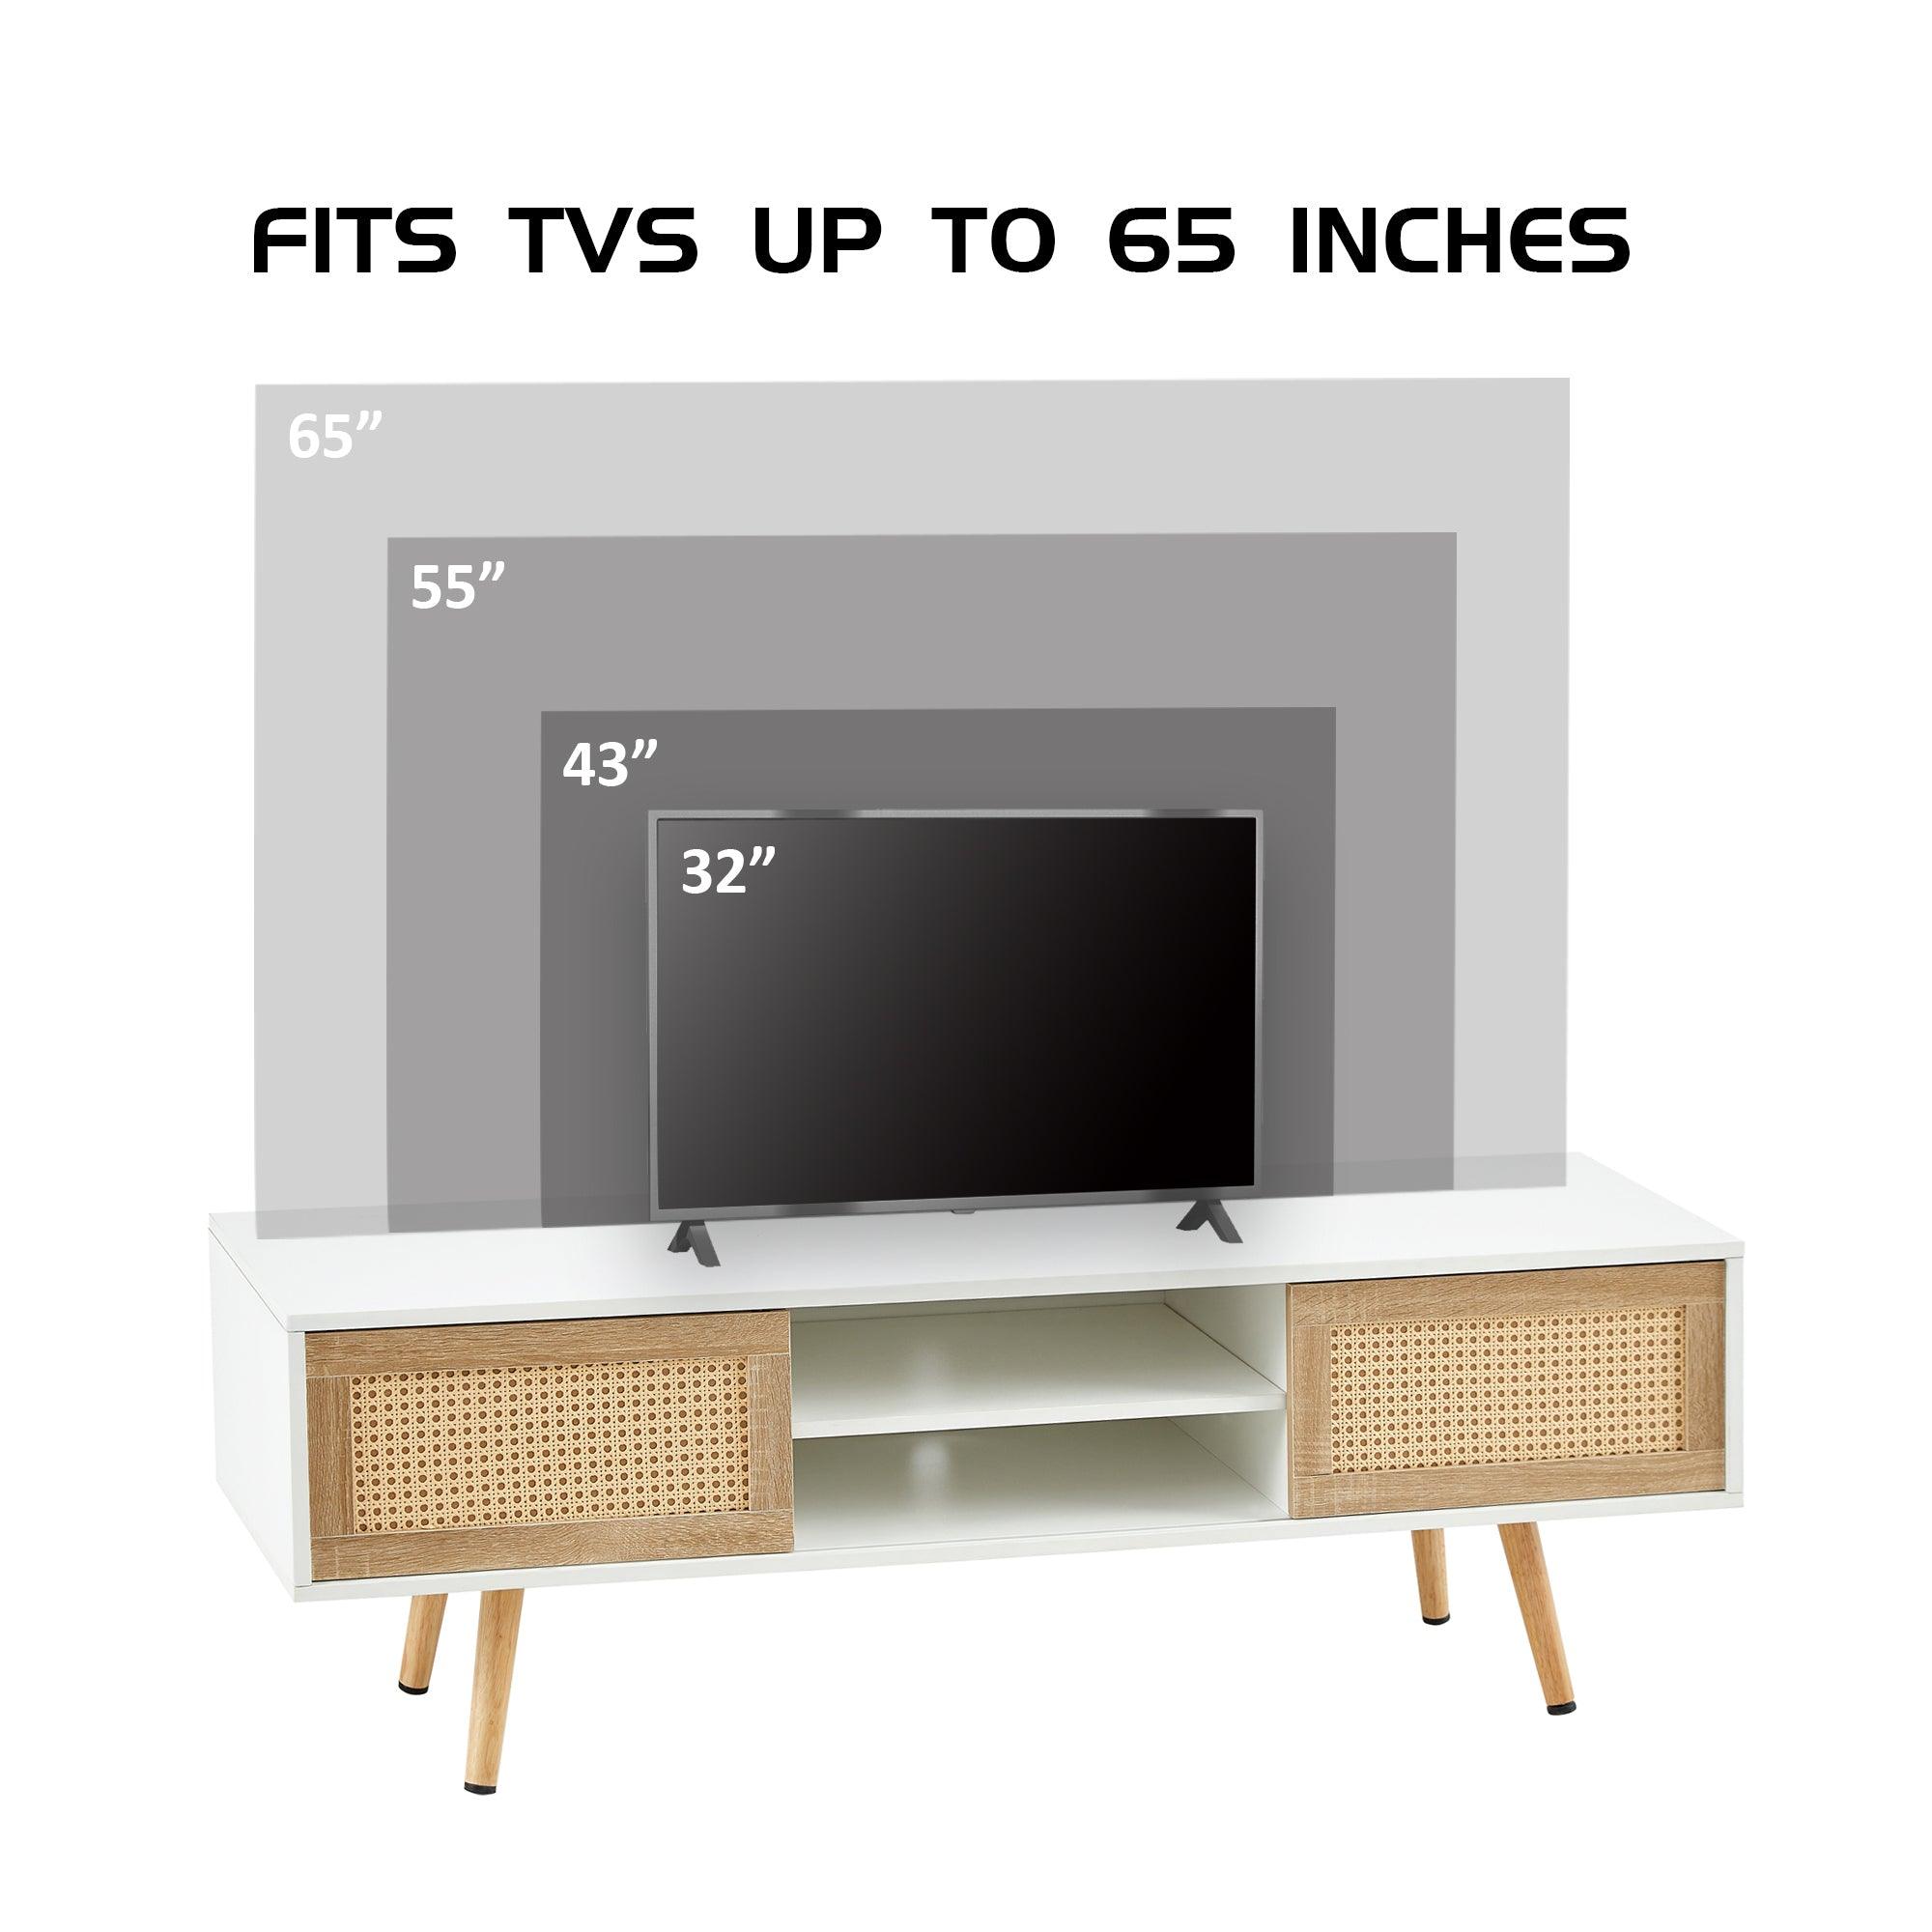 55.12" Rattan TV cabinet, double sliding doors for storage,  adjustable shelf, solid wood legs, TV console for living room , White